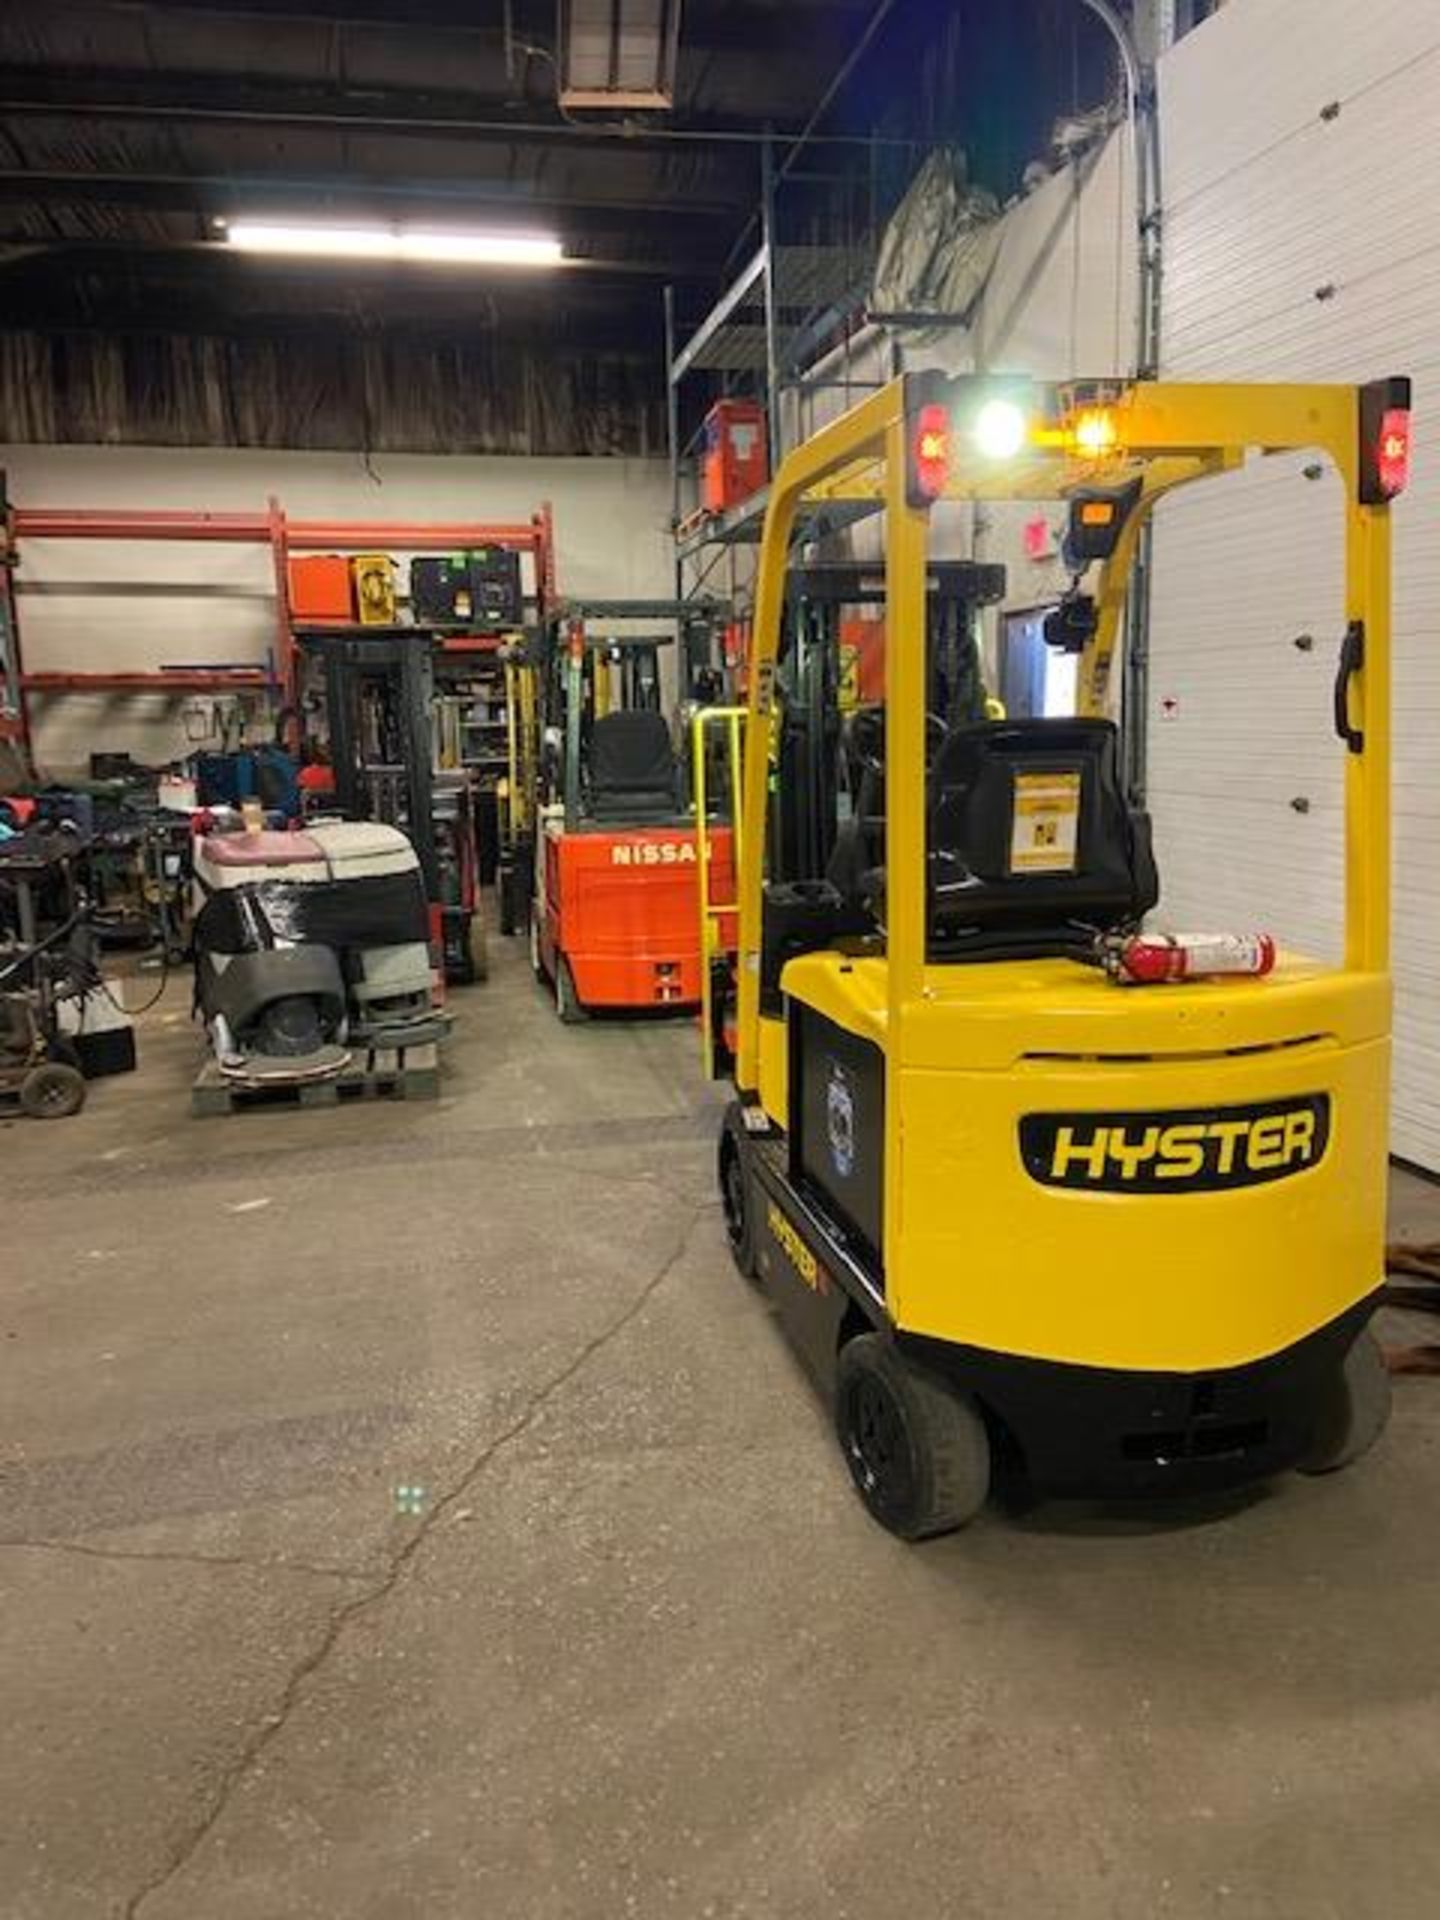 FREE CUSTOMS - 2015 Hyster 5000lbs Capacity Forklift Electric with 3-STAGE MAST with sideshift - Image 3 of 3